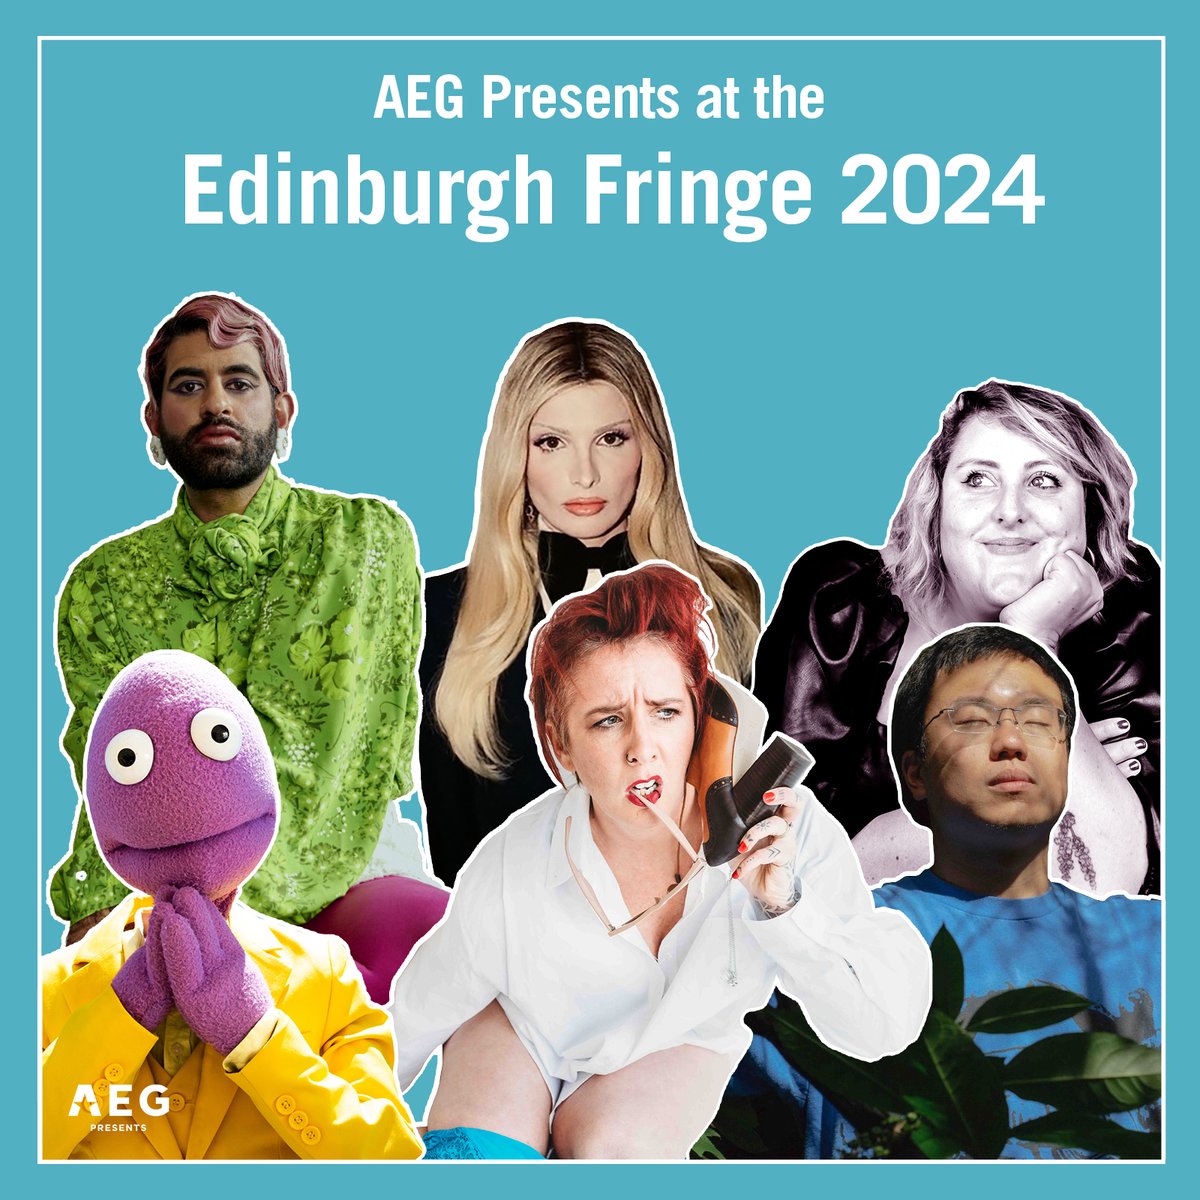 ON SALE NOW! AEG Presents at the Edinburgh Fringe 2024 We're back again this Summer bringing 6 incredible shows to Scotland! Tickets on sale now: aegp.uk/EdinburghFringe